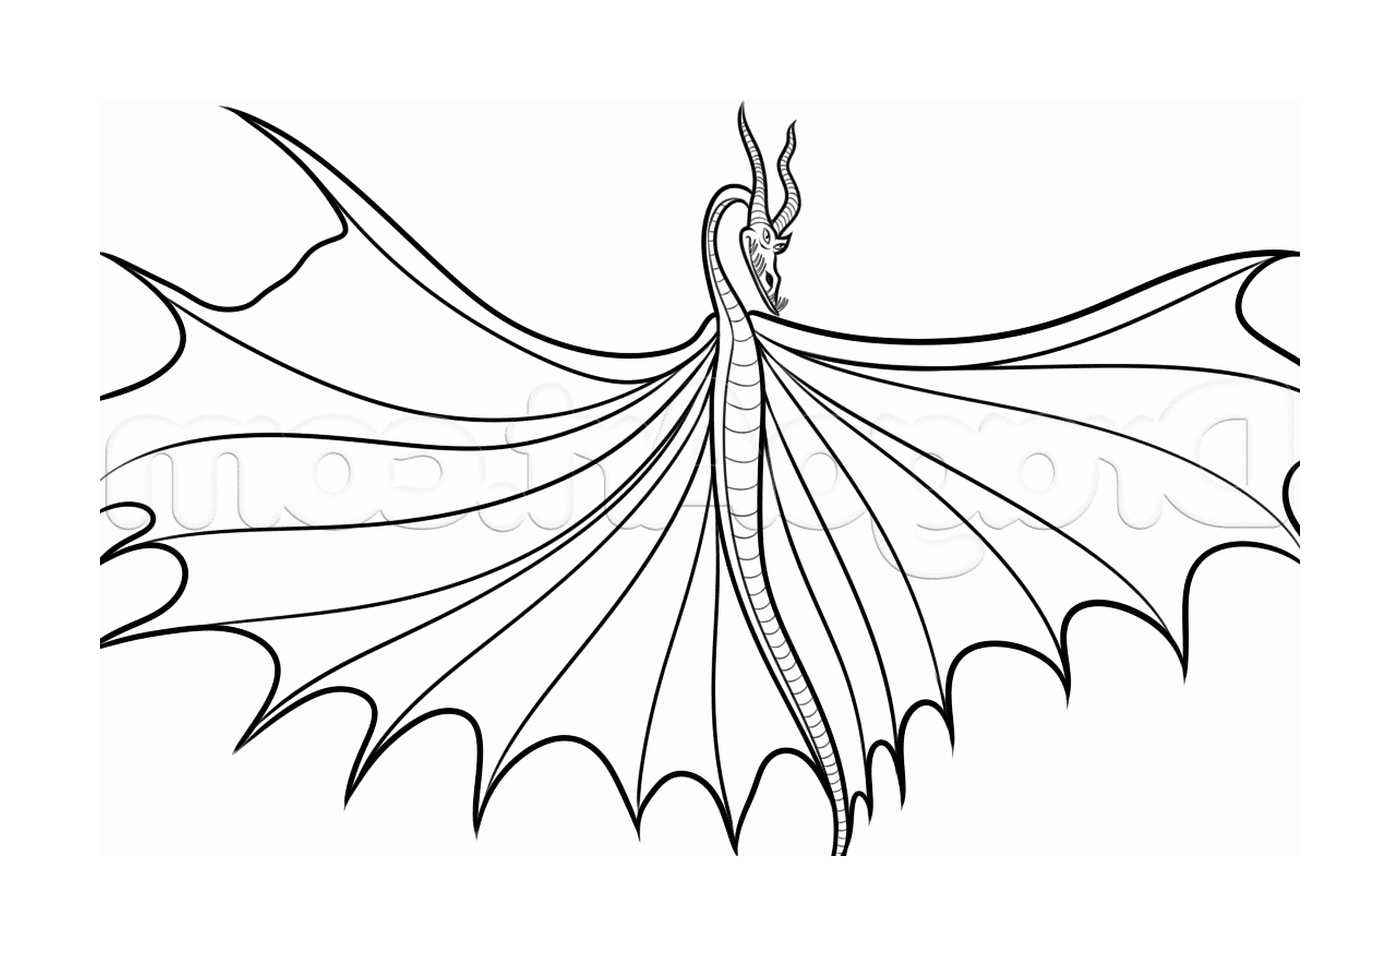  Timberjack, a dragon with deployed wings 